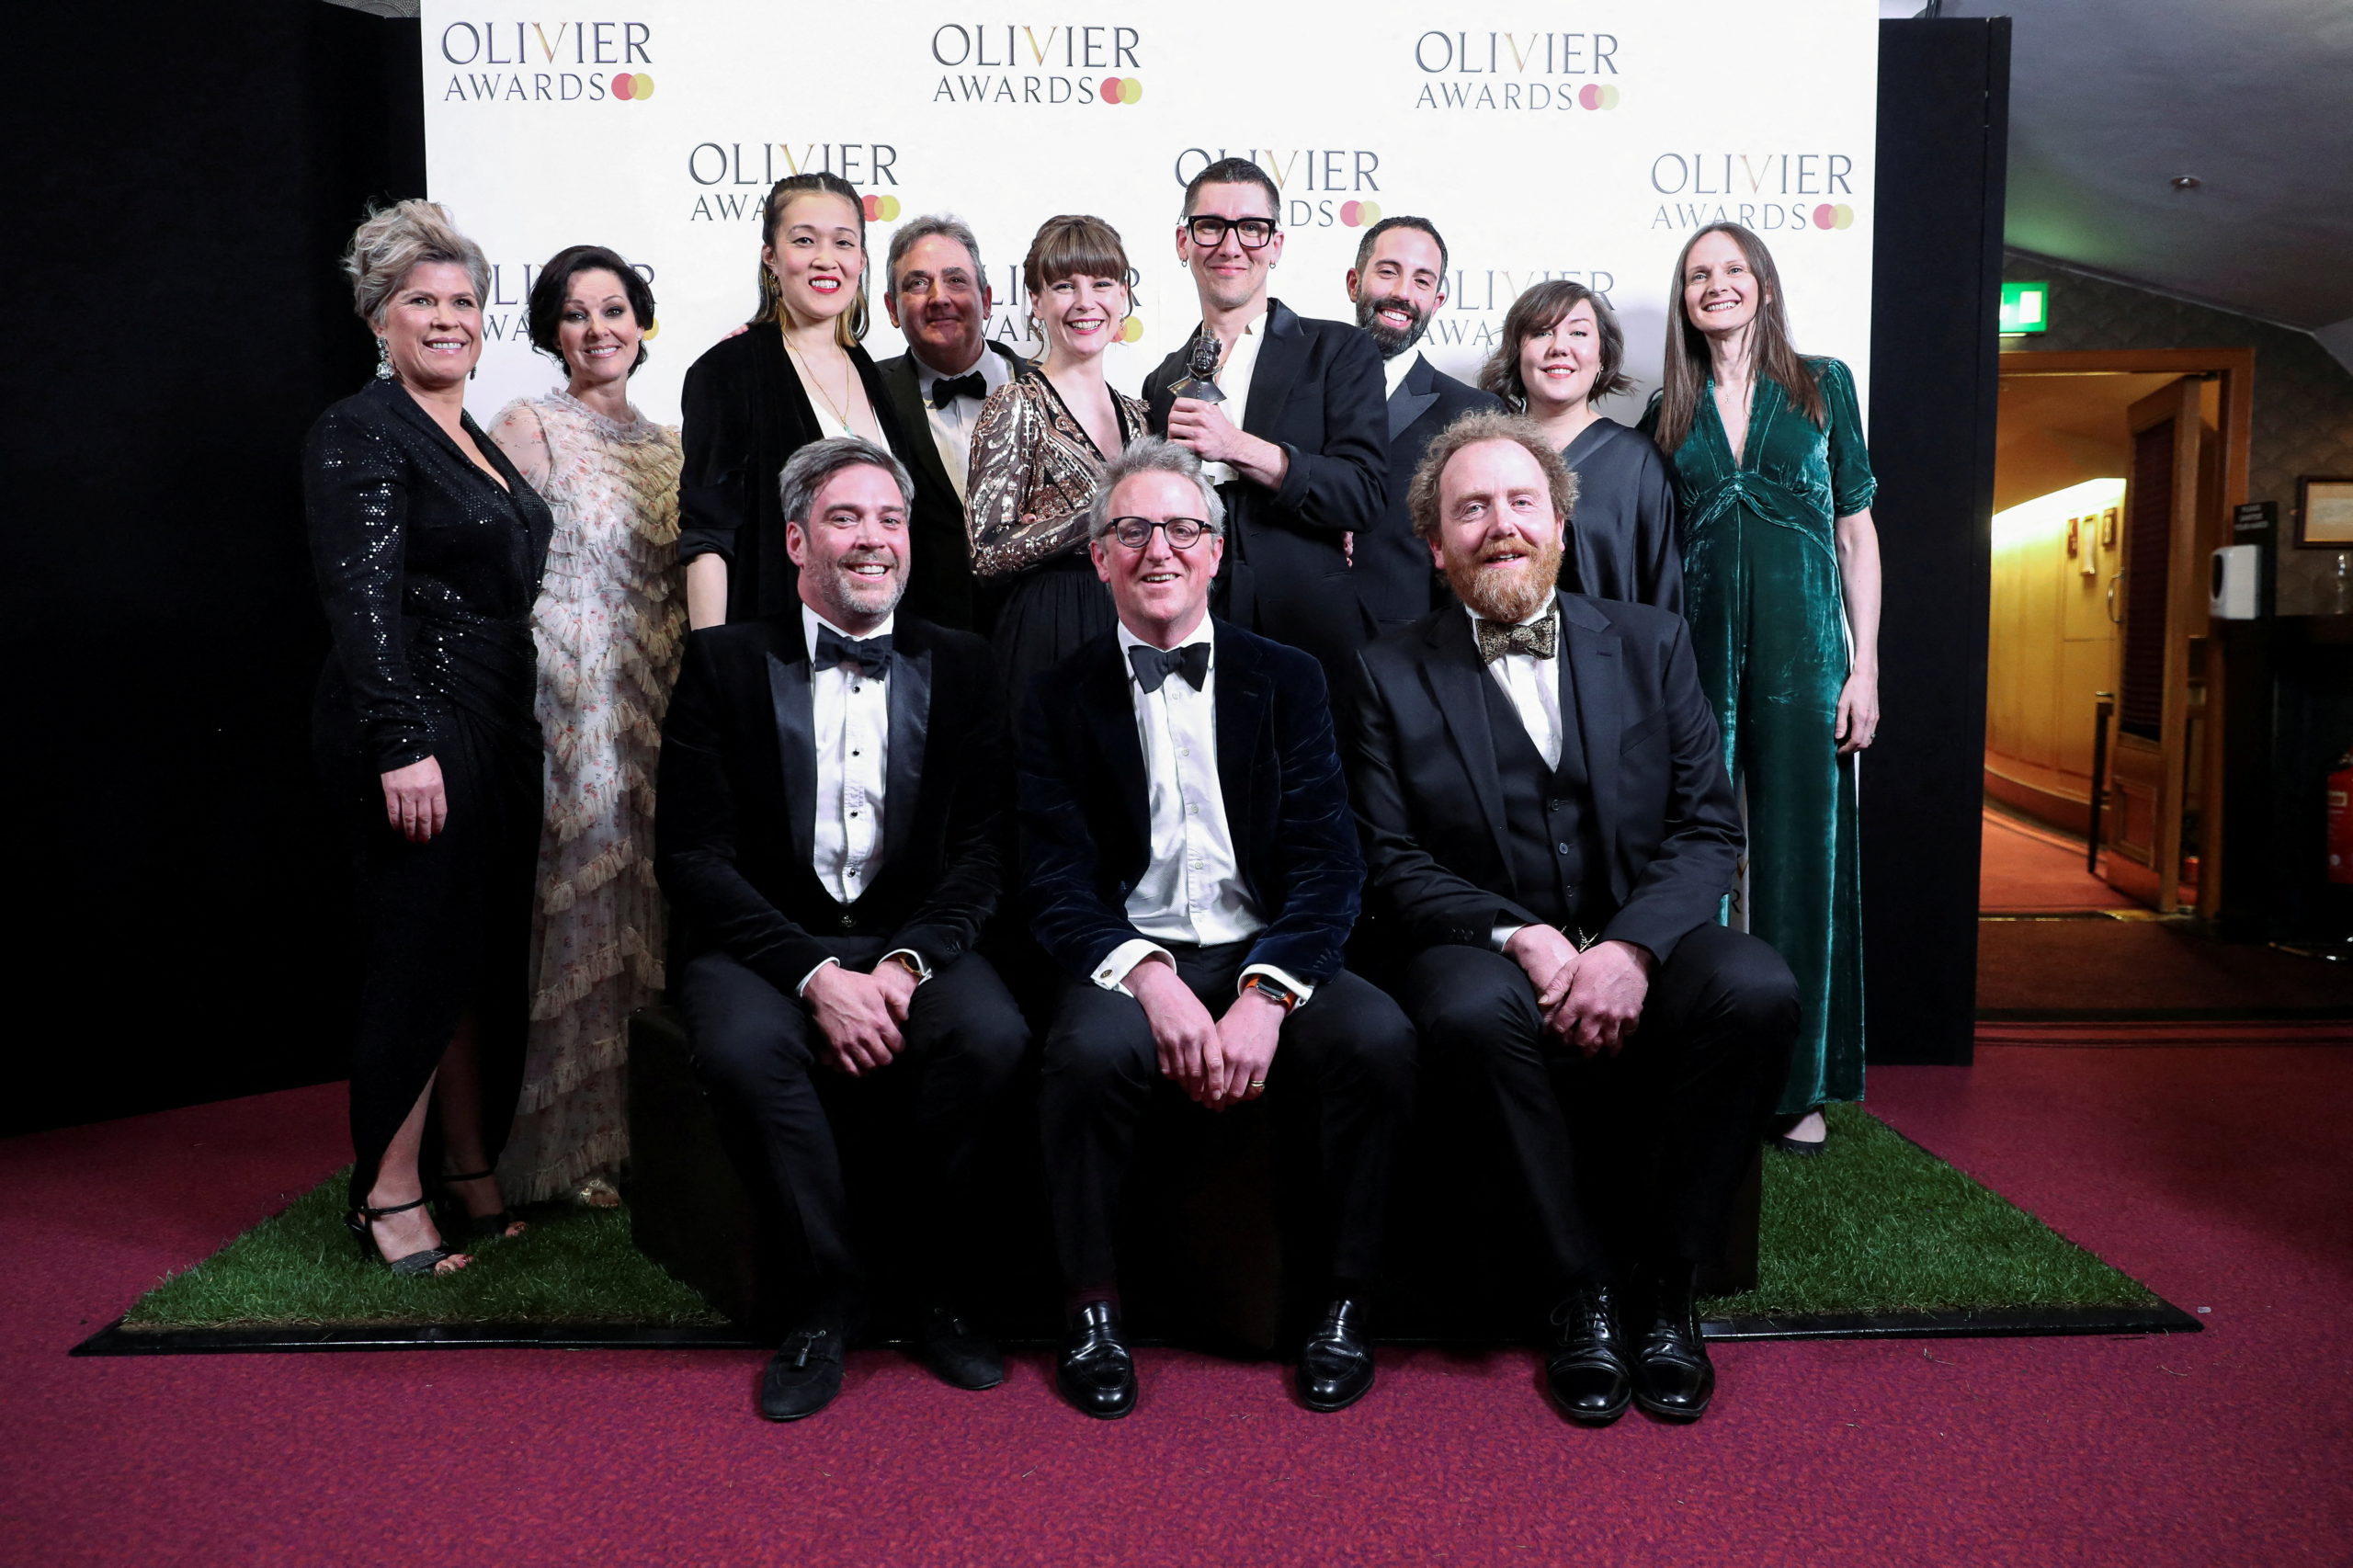 The "Cabaret" crew, winners of the Best Musical Revival award, pose in the winner's room at the Olivier Awards in the Royal Opera House in London, Britain April 10, 2022. REUTERS/May James